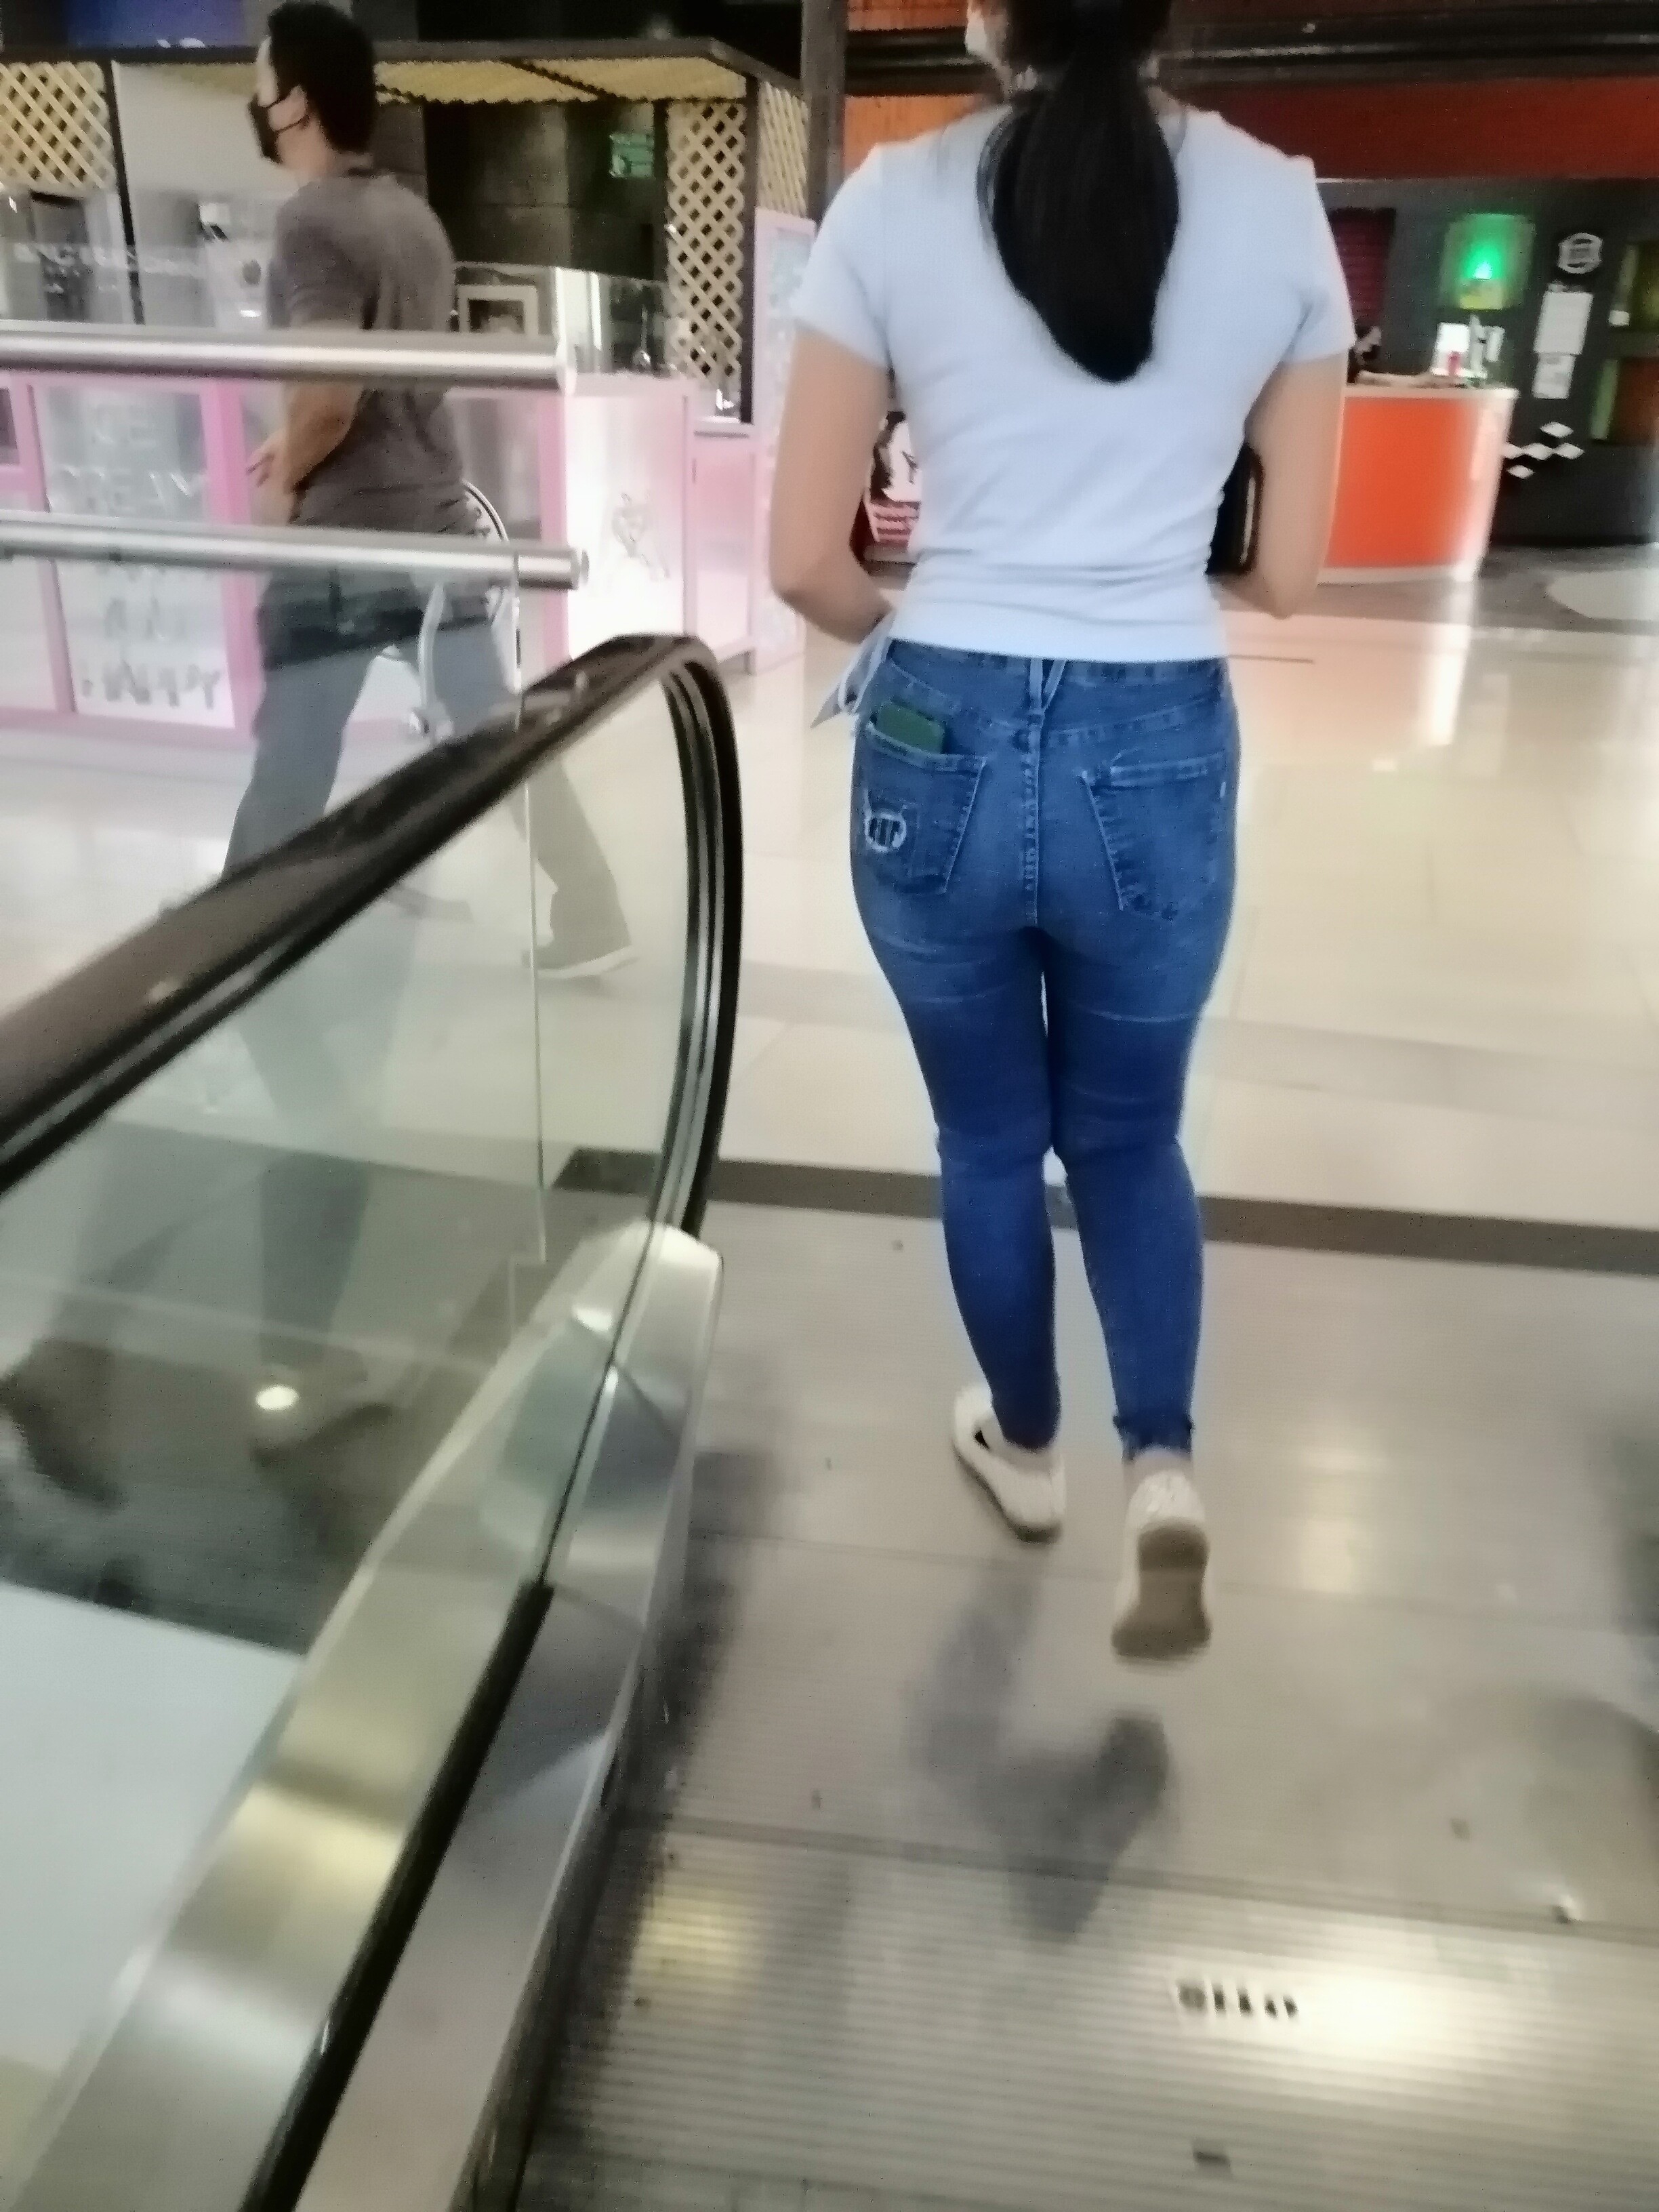 Some Asses while shopping - Tight Jeans - Forum